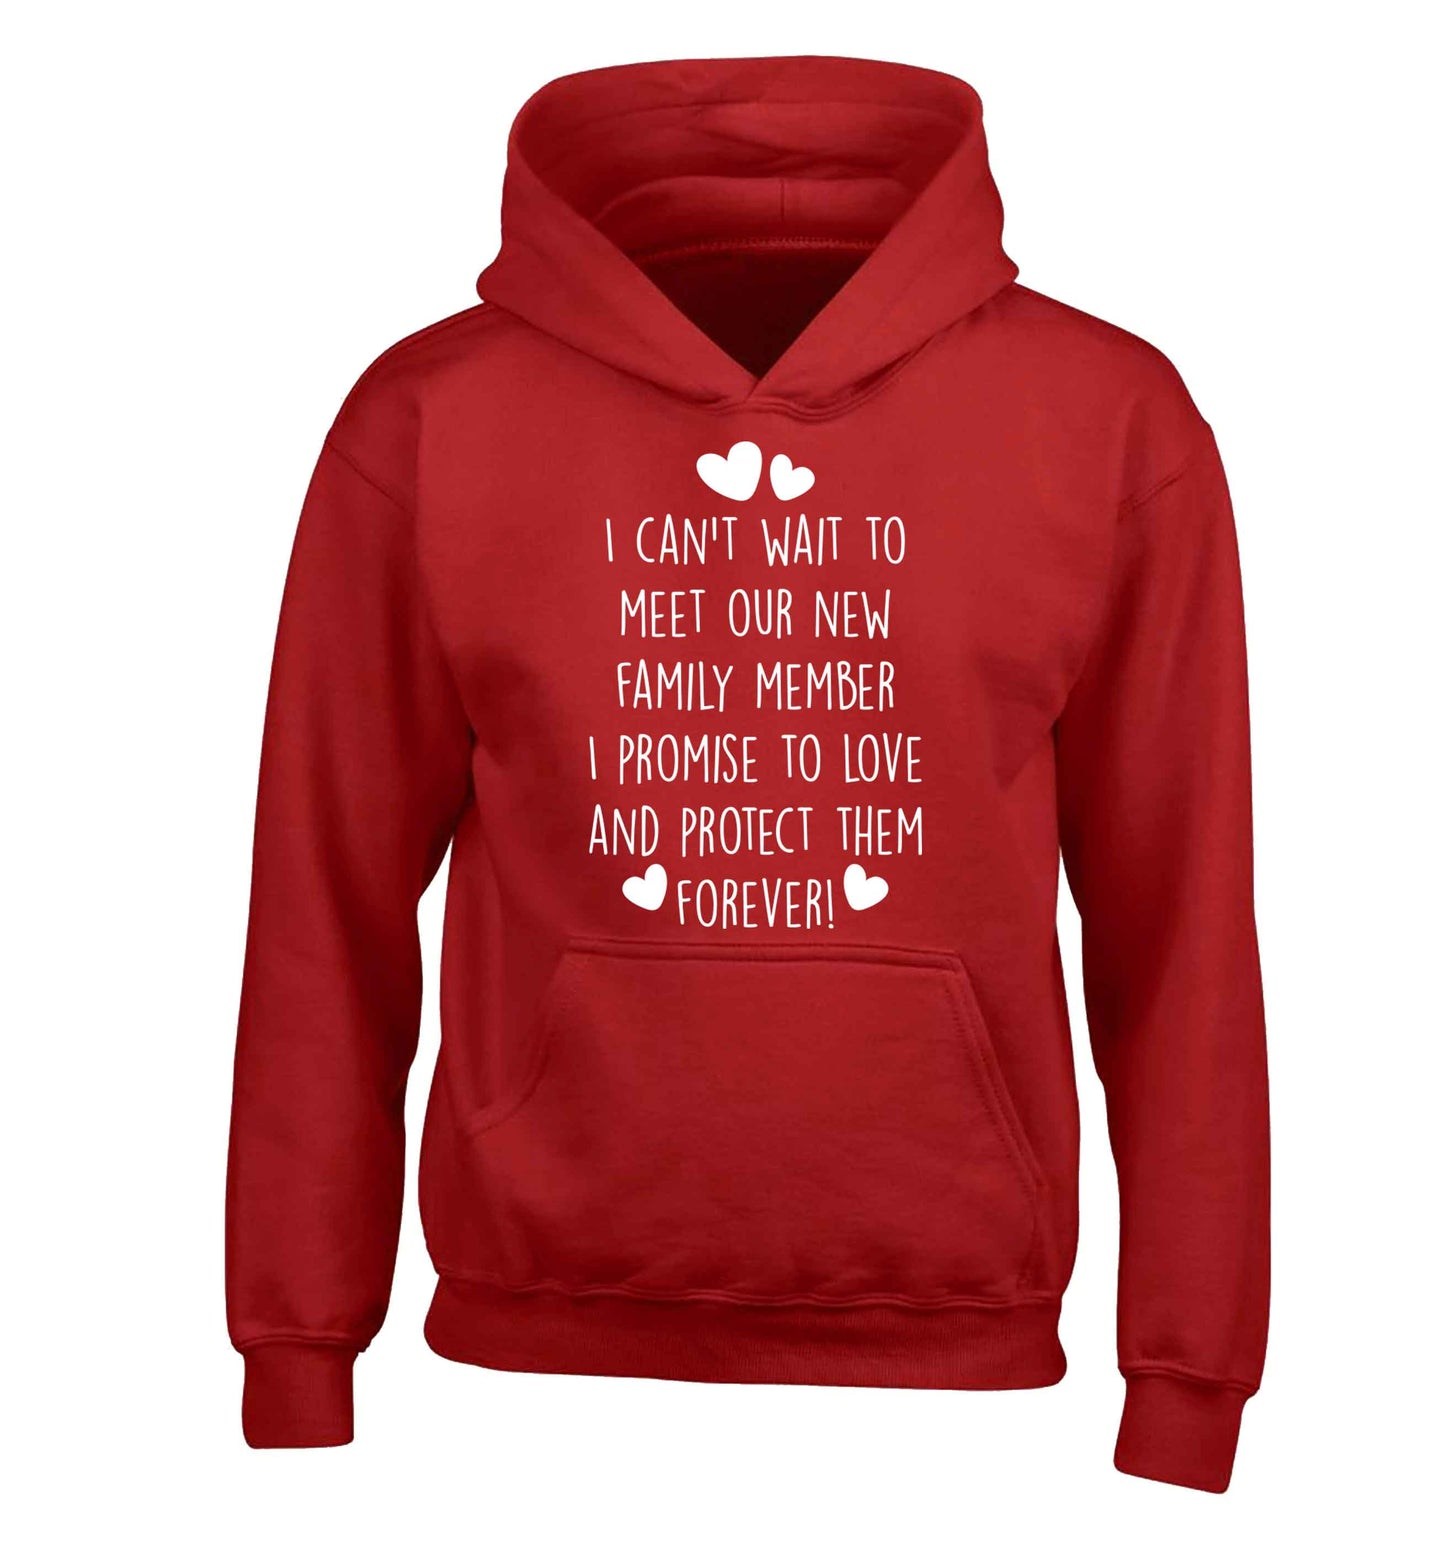 I can't wait to meet our new family member I promise to love and protect them foreverchildren's red hoodie 12-13 Years